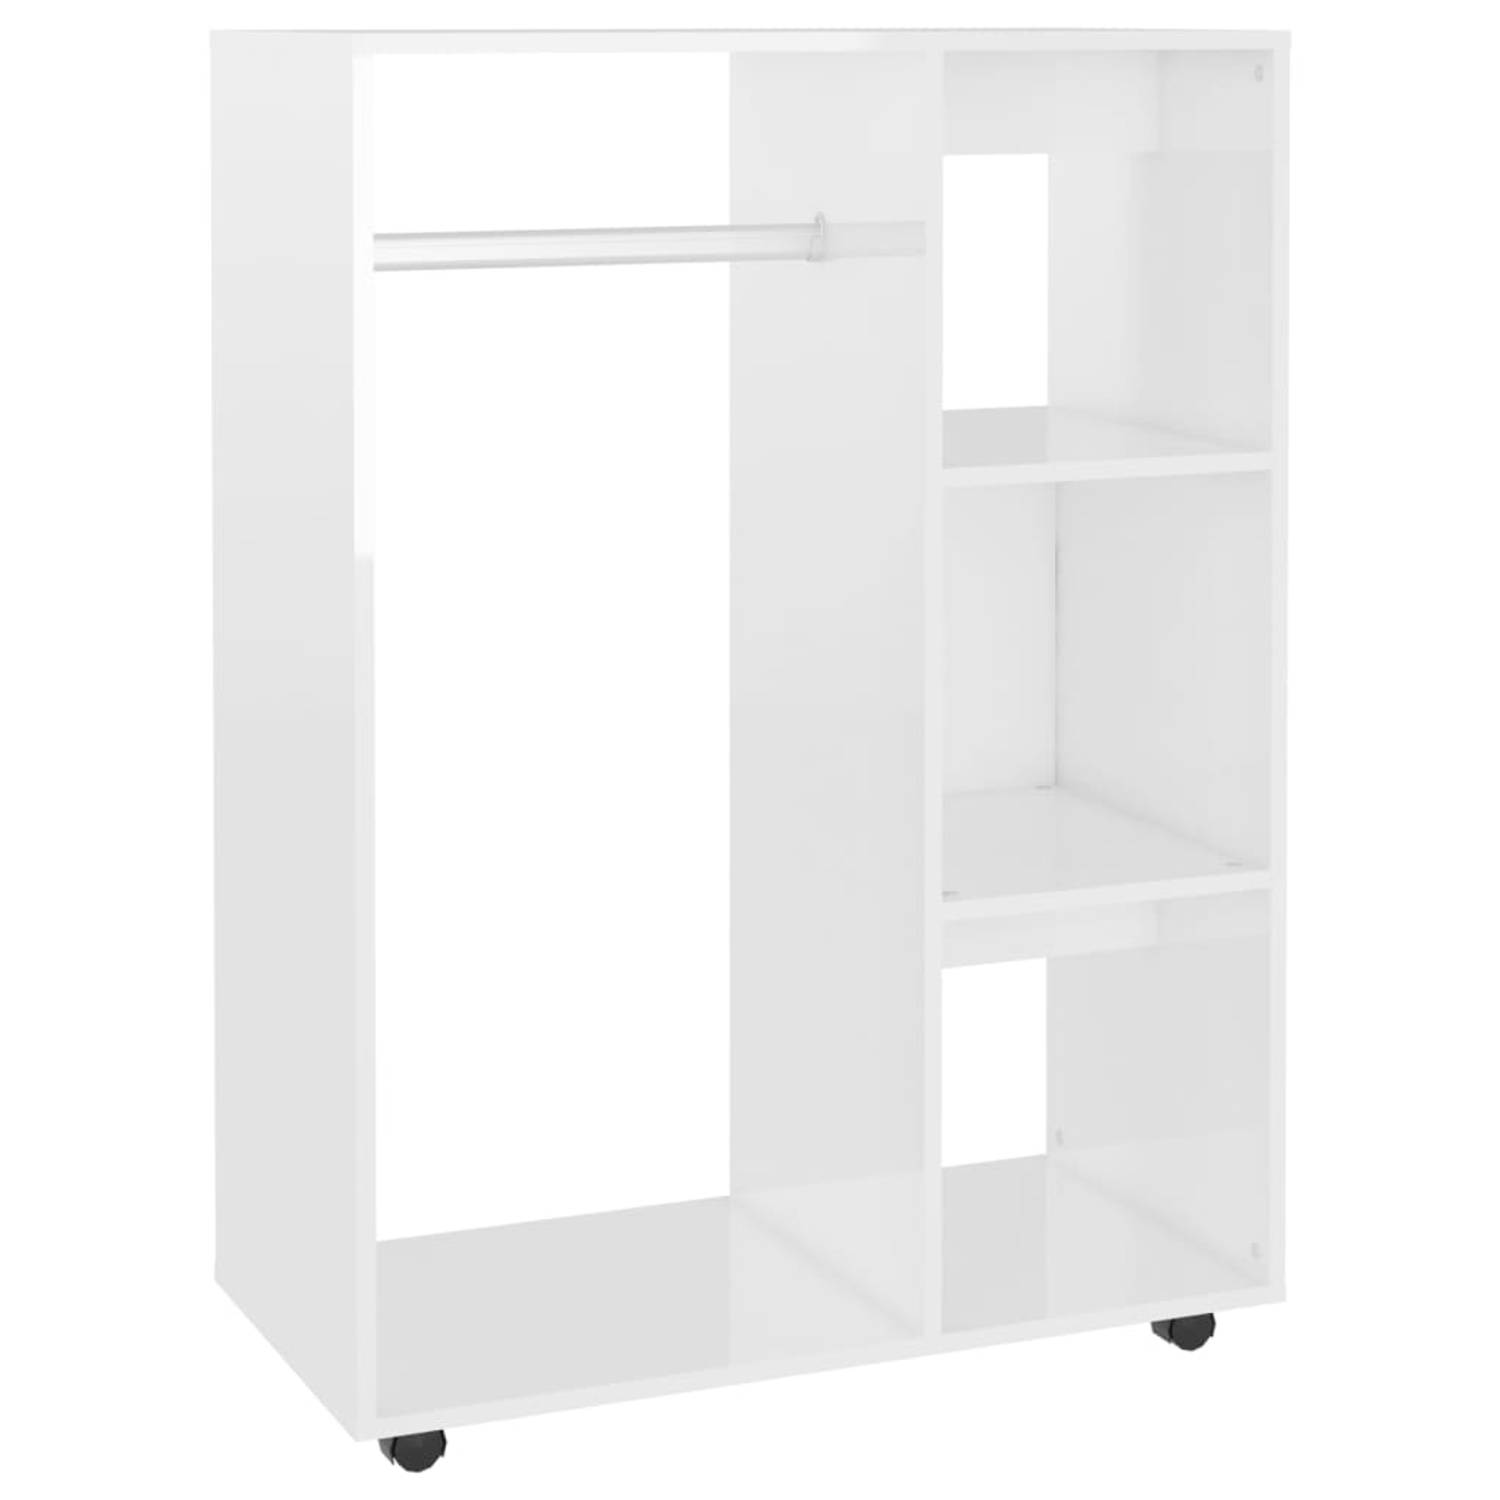 The Living Store Opbergkast - 80 x 40 x 110 cm - Hoogglans wit